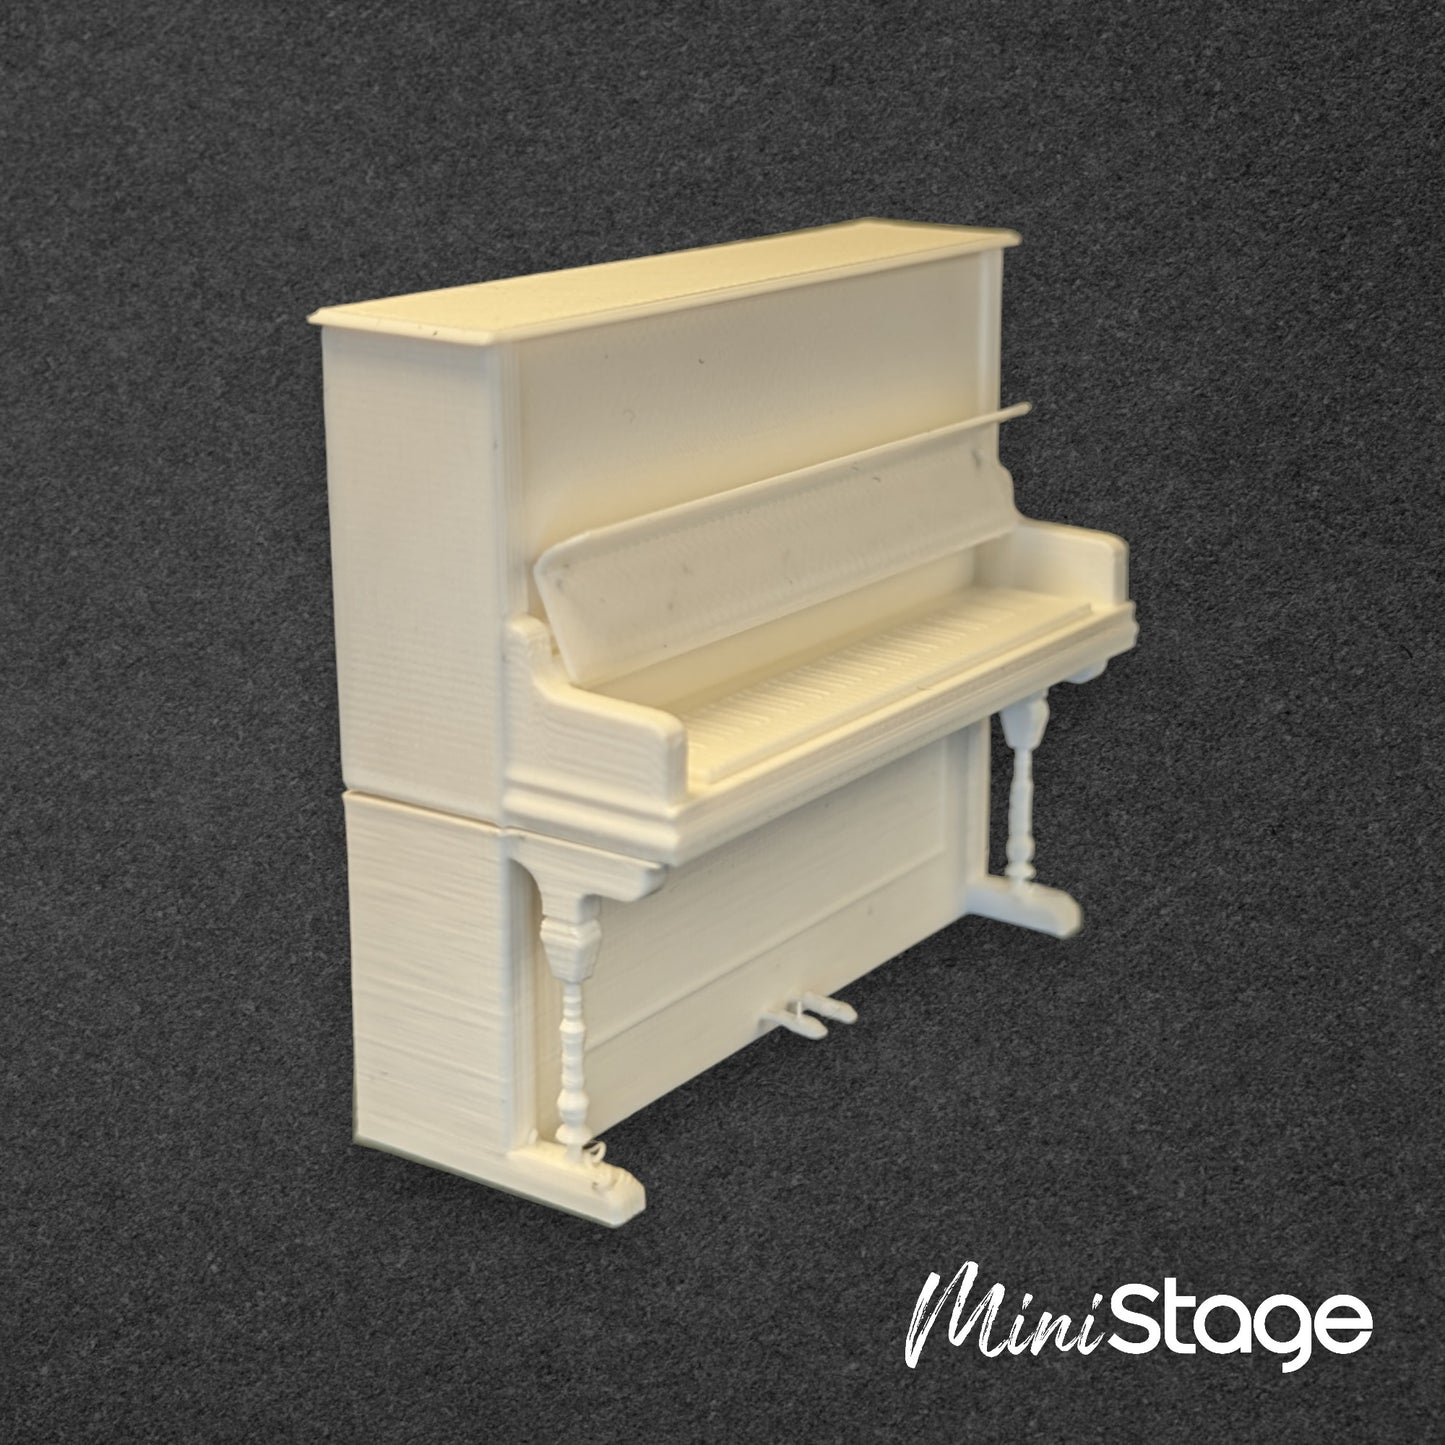 1:25 Scale 3D Printed Model of an Upright Piano